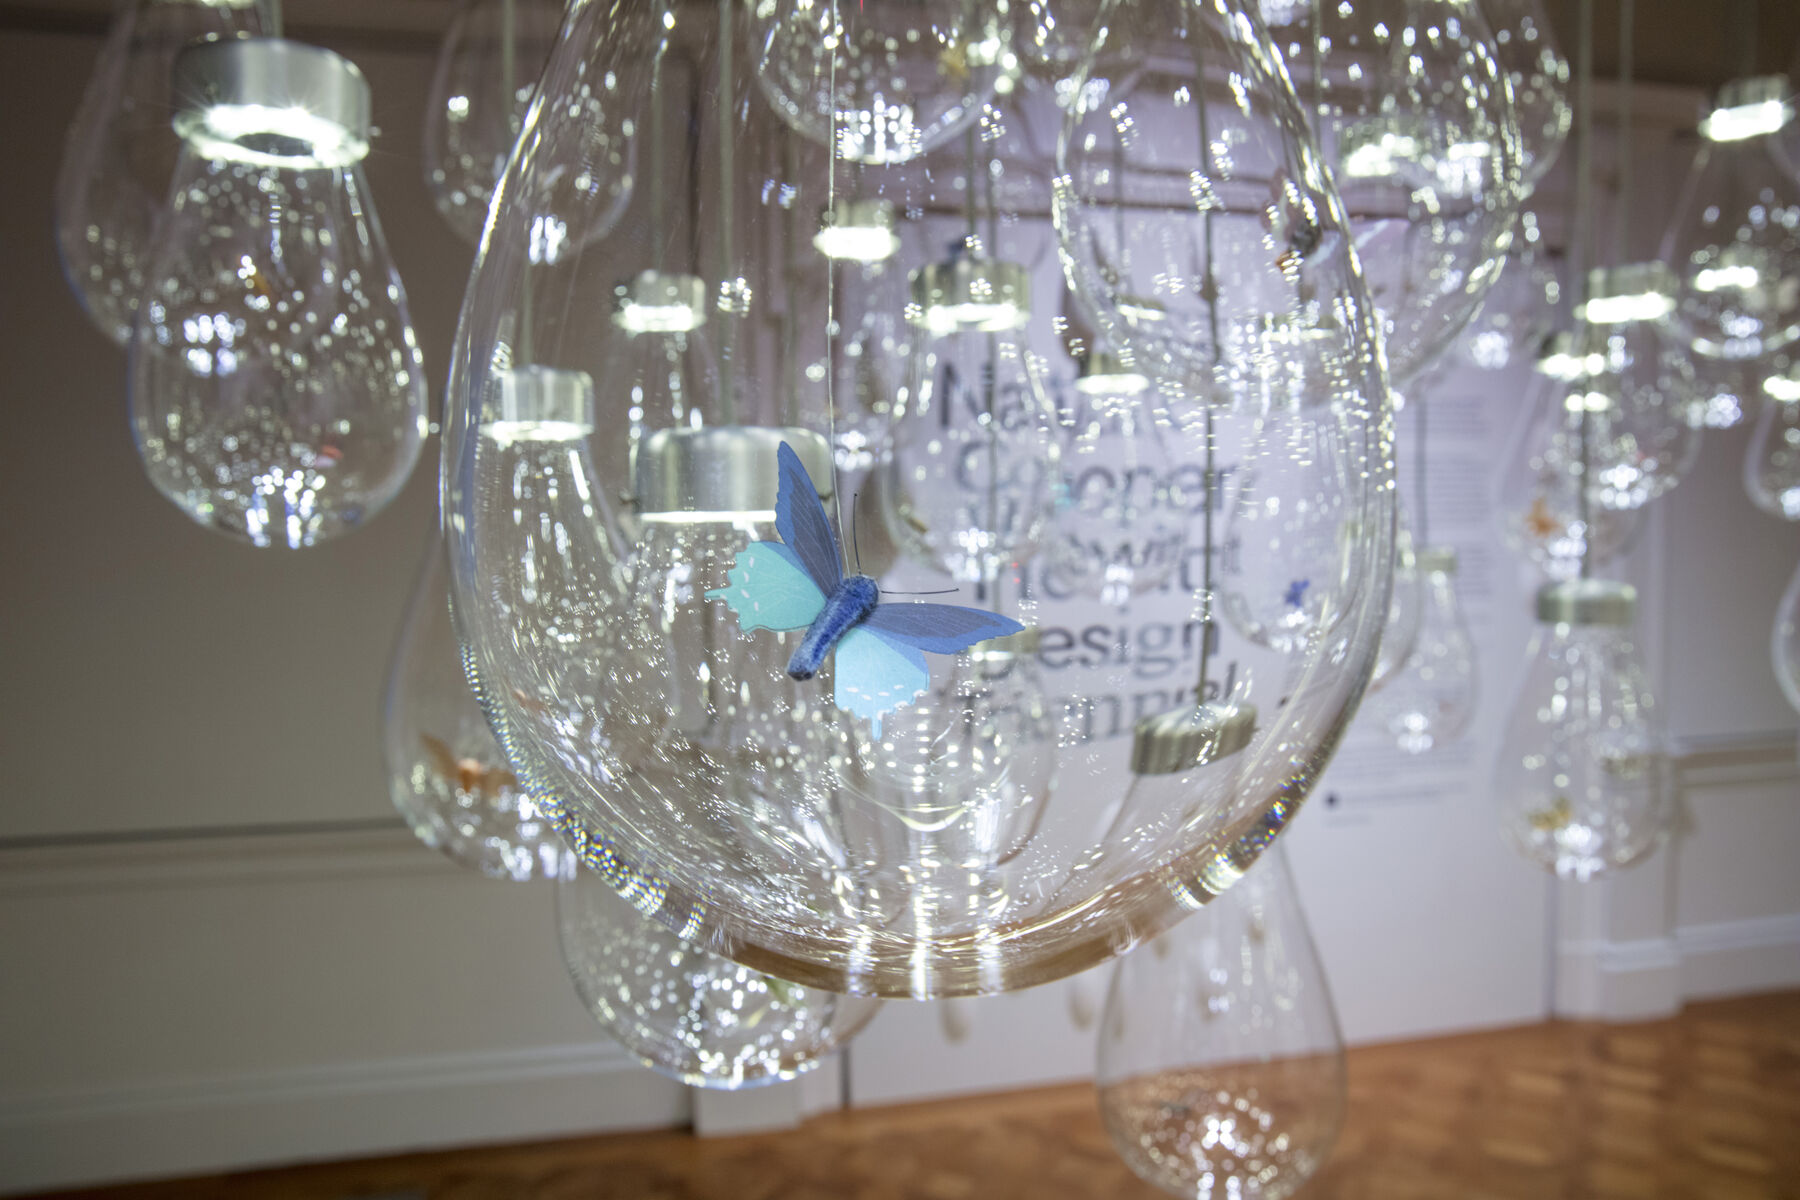 A close-up view of a blown glass bulb with a blue butter butterfly on top with other bulbs surrounding it